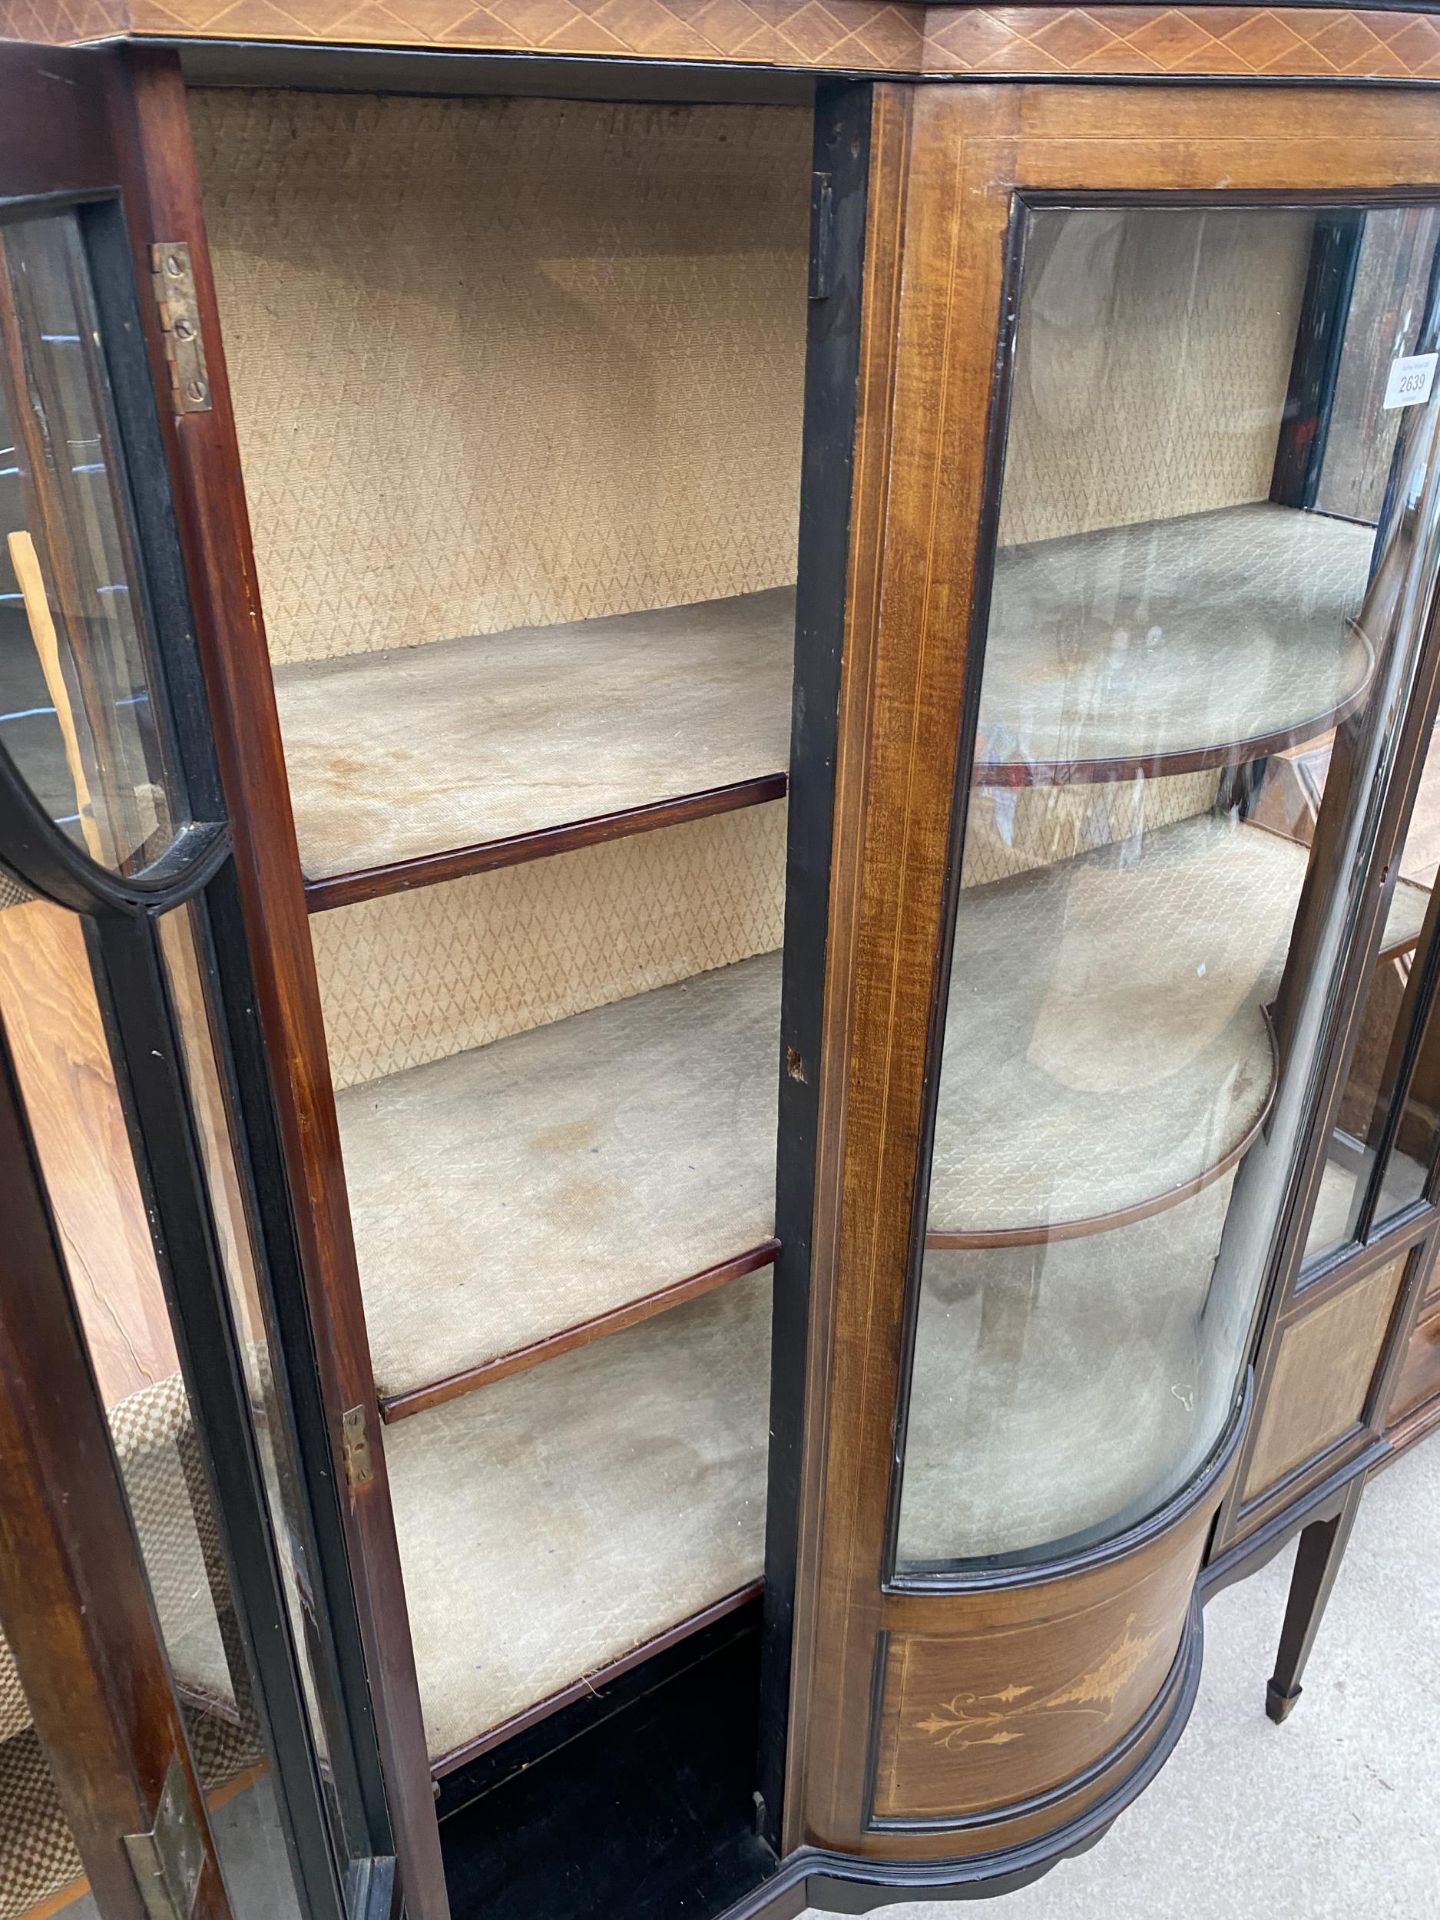 AN EDWARDIAN MAHOGANY AND INLAID BOWFRONTED CHINA DISPLAY CABINET ON TAPERED LEGS, WITH SPADE - Image 6 of 7